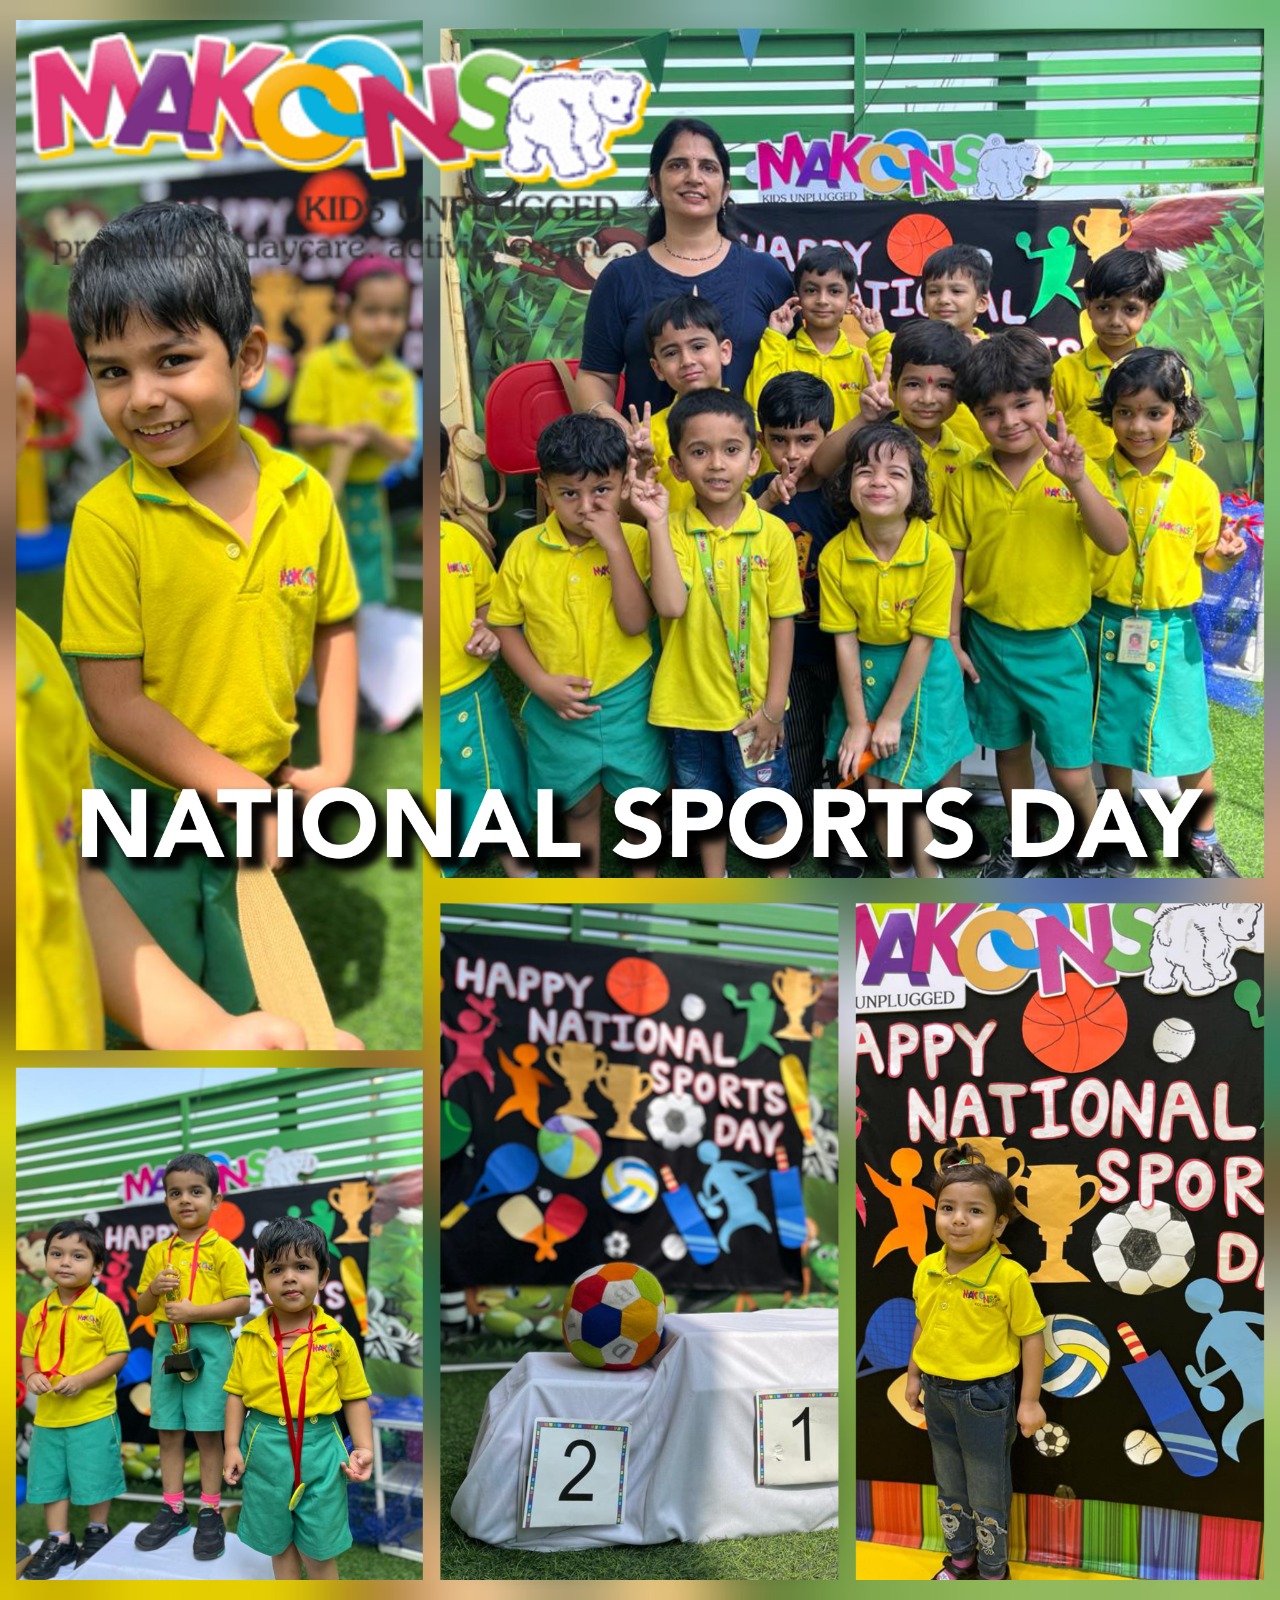 makoons-play-school-celebrates-national-sports-day-with-zeal-and-enthusiasm-across-all-branches